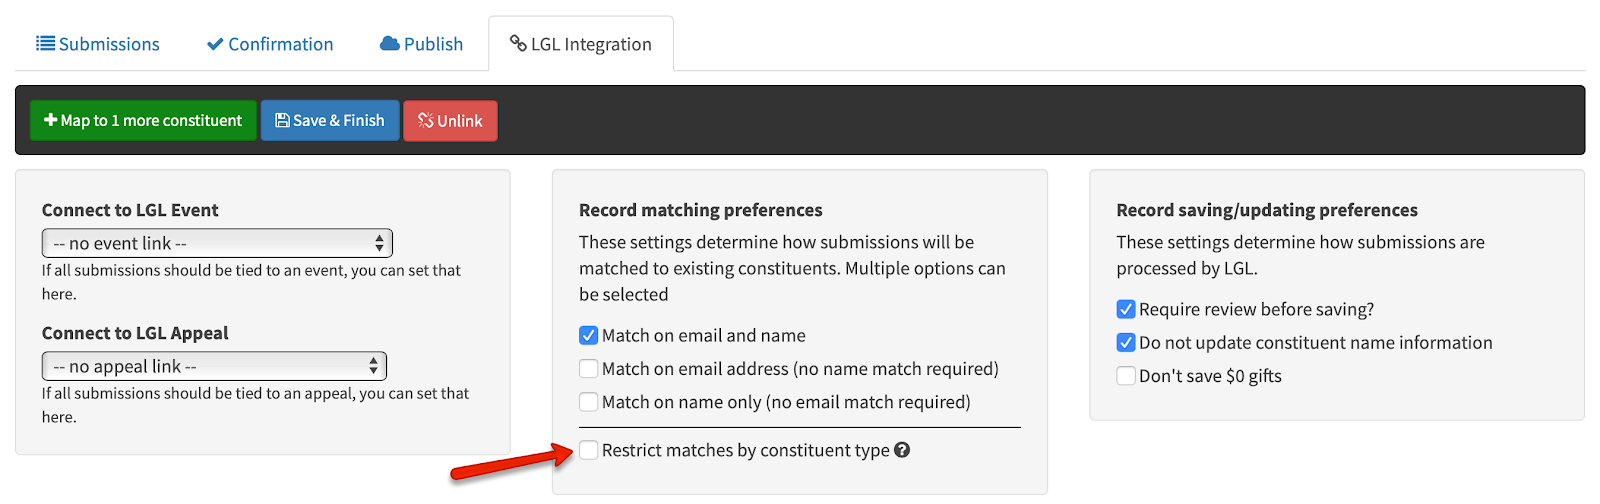 How to restrict matches by constituent type in LGL Forms